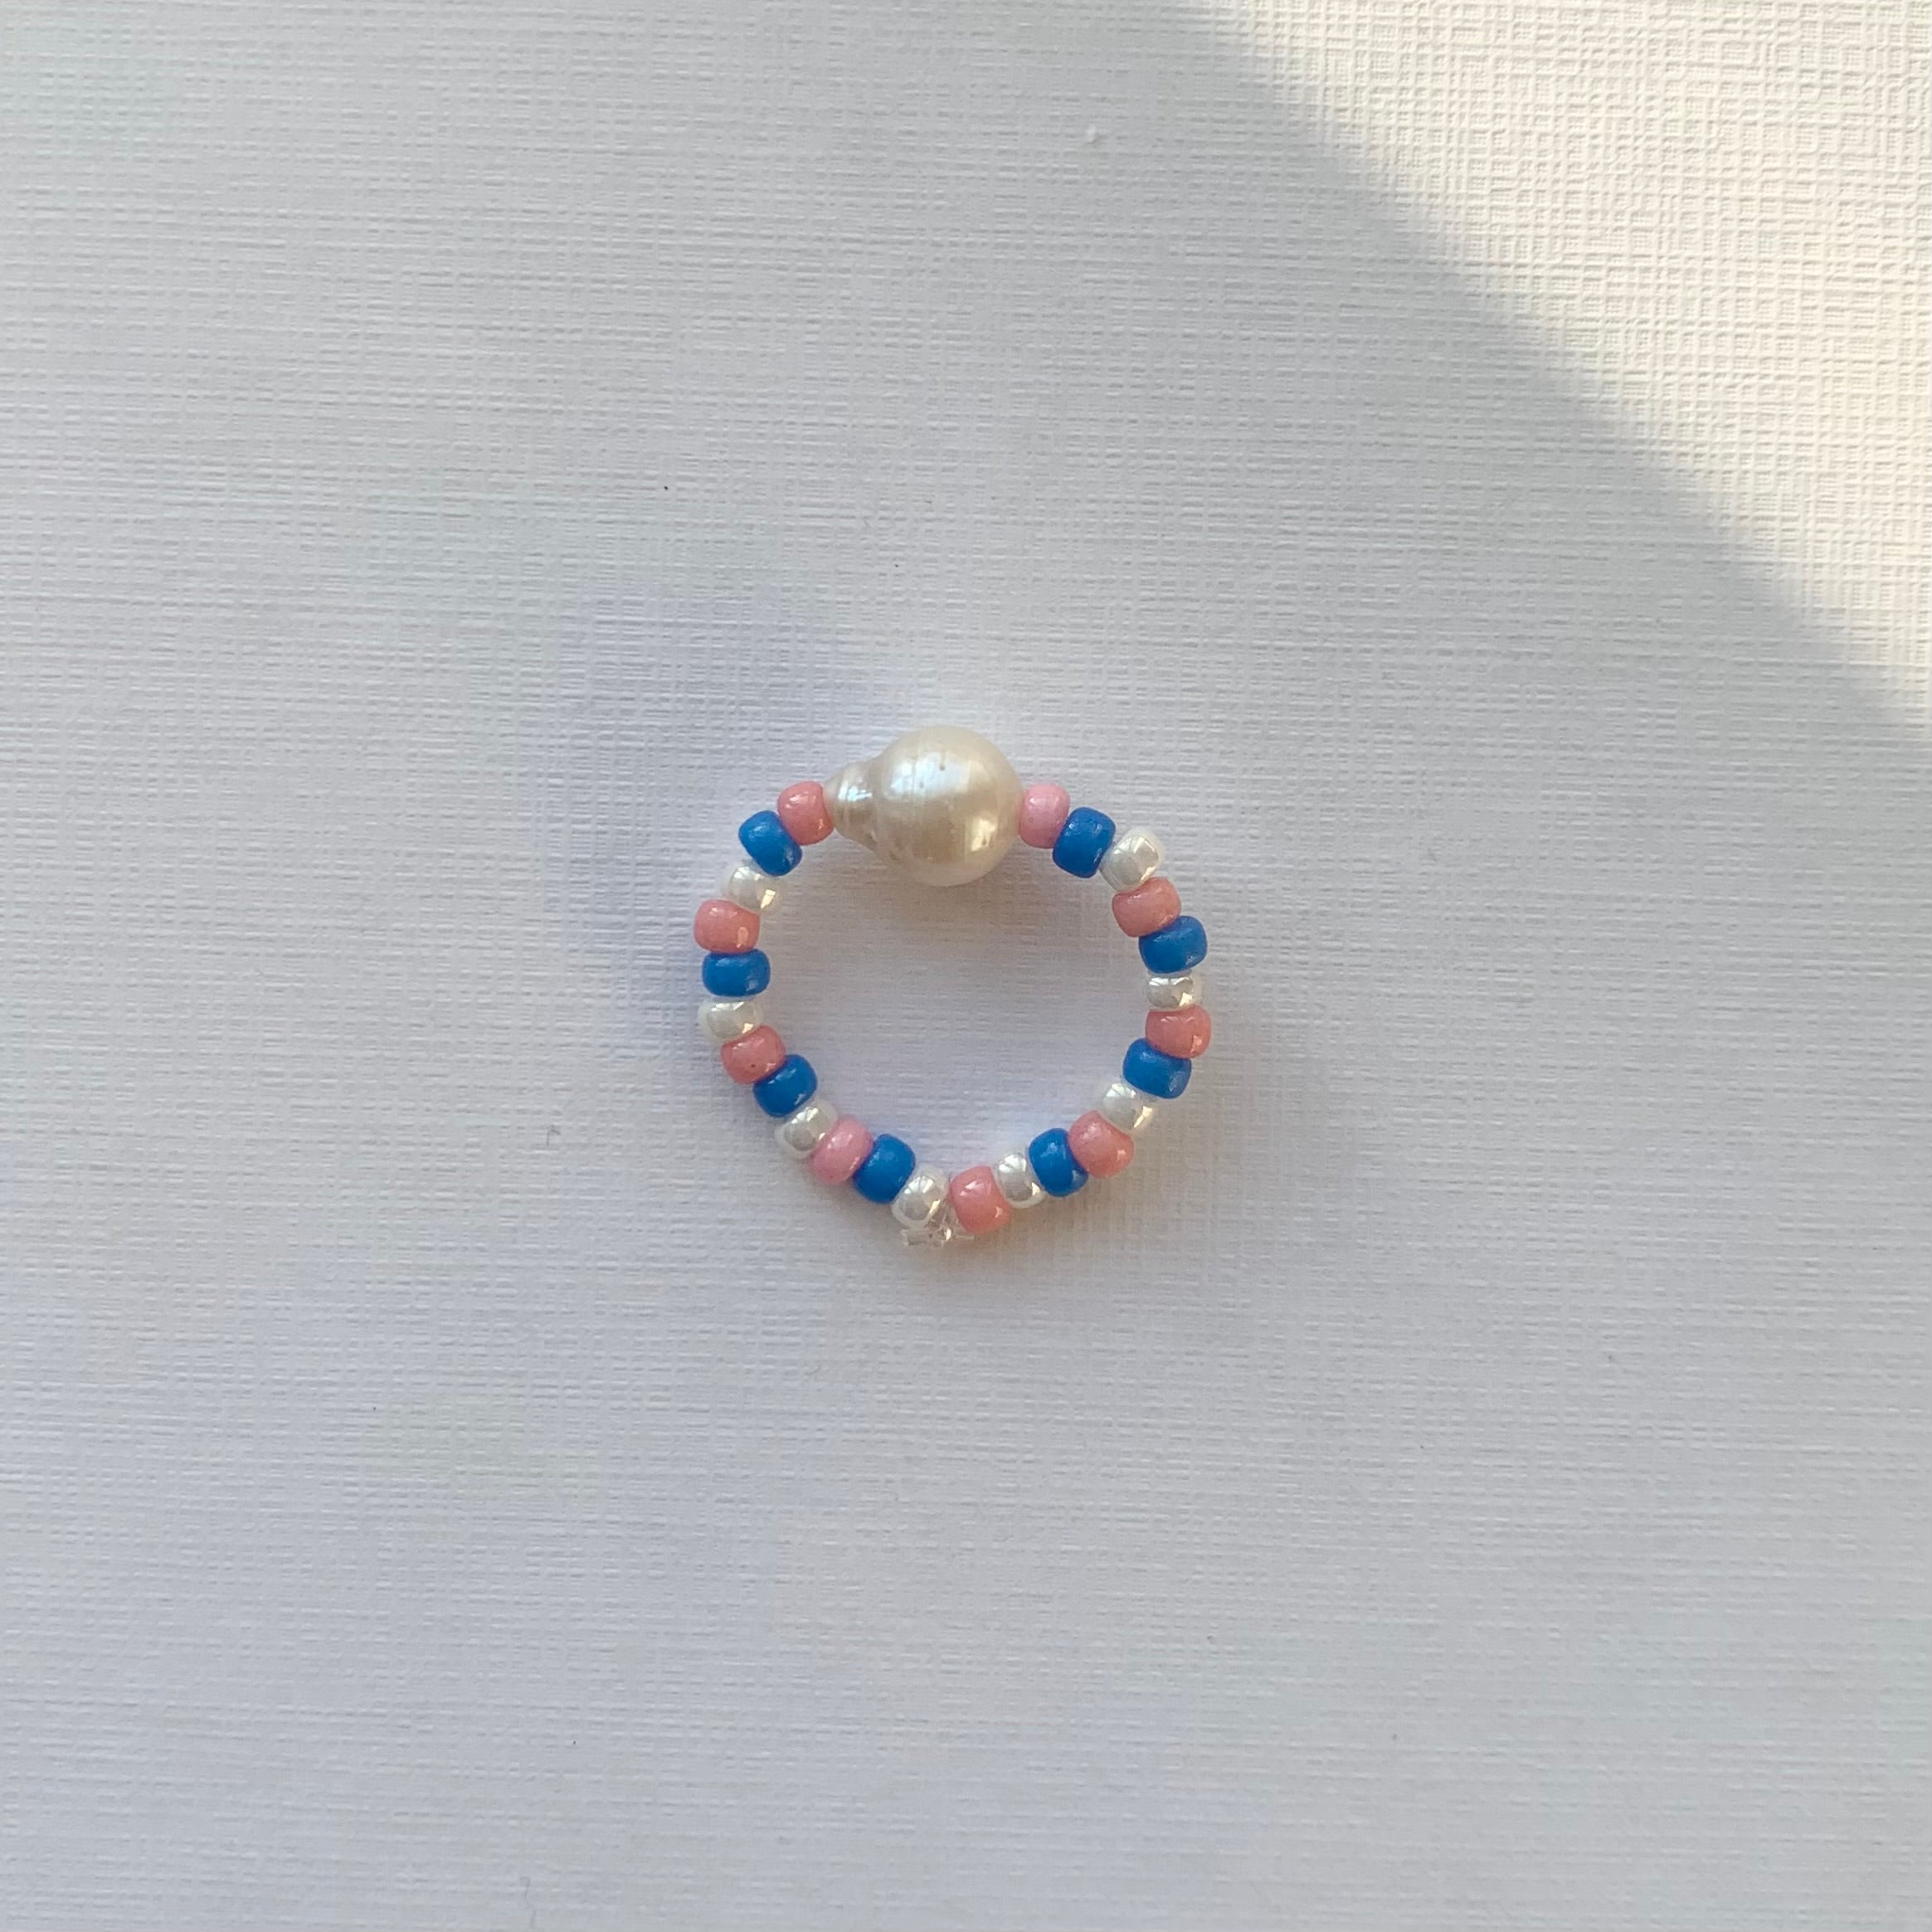 Cheerful Ring - True Blue, Pink & Pearly White